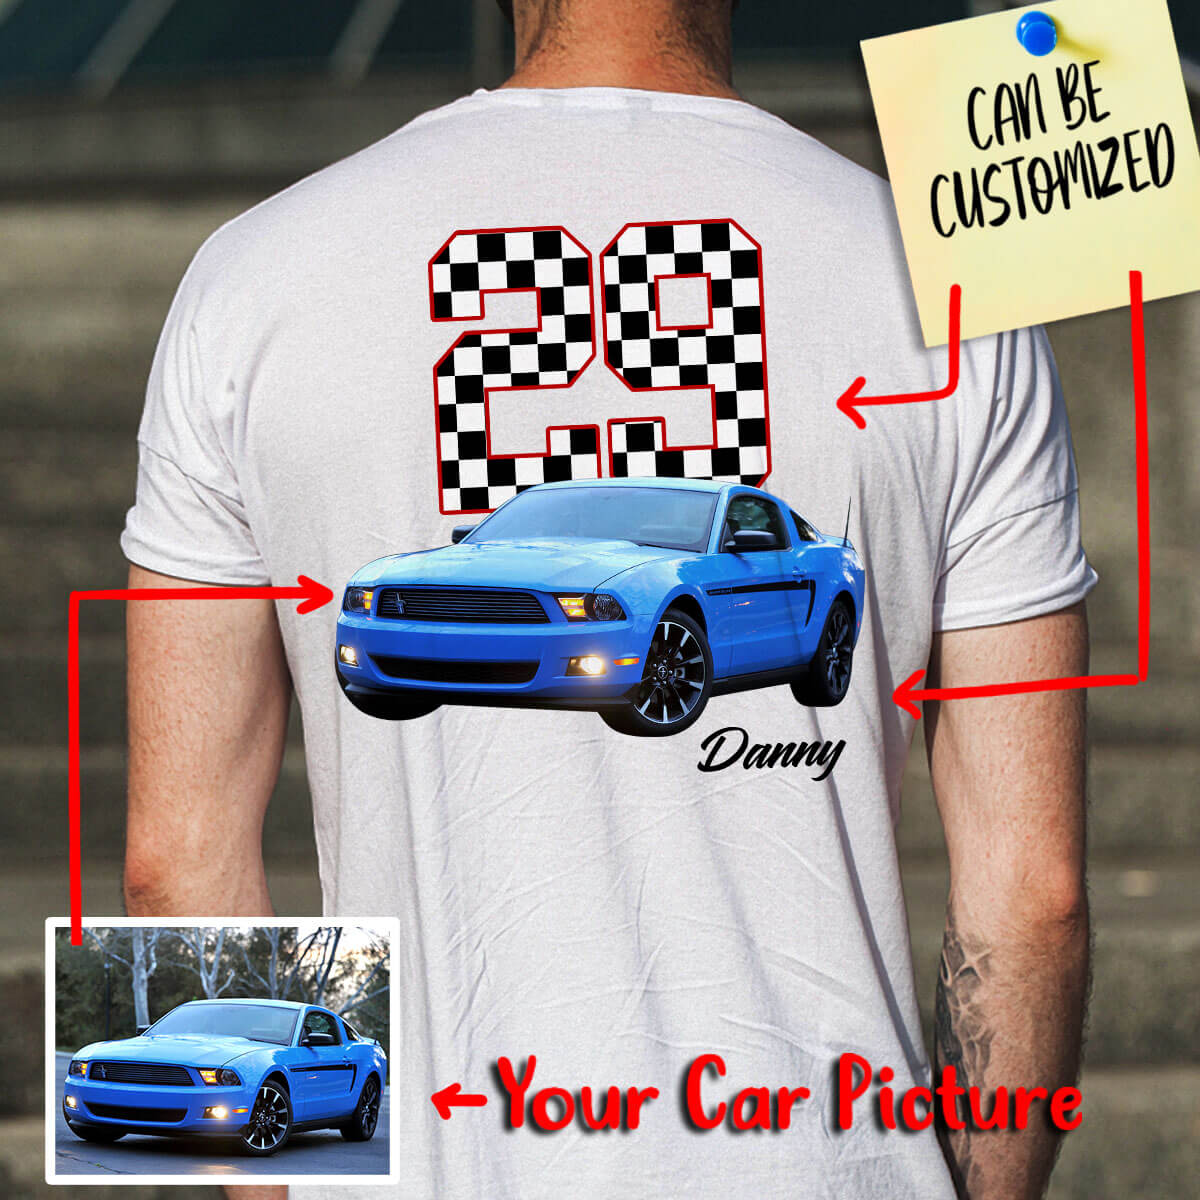 Customized Mustang Art T-shirt Collection Fa Graphic - Mustang StreetKars Art And 